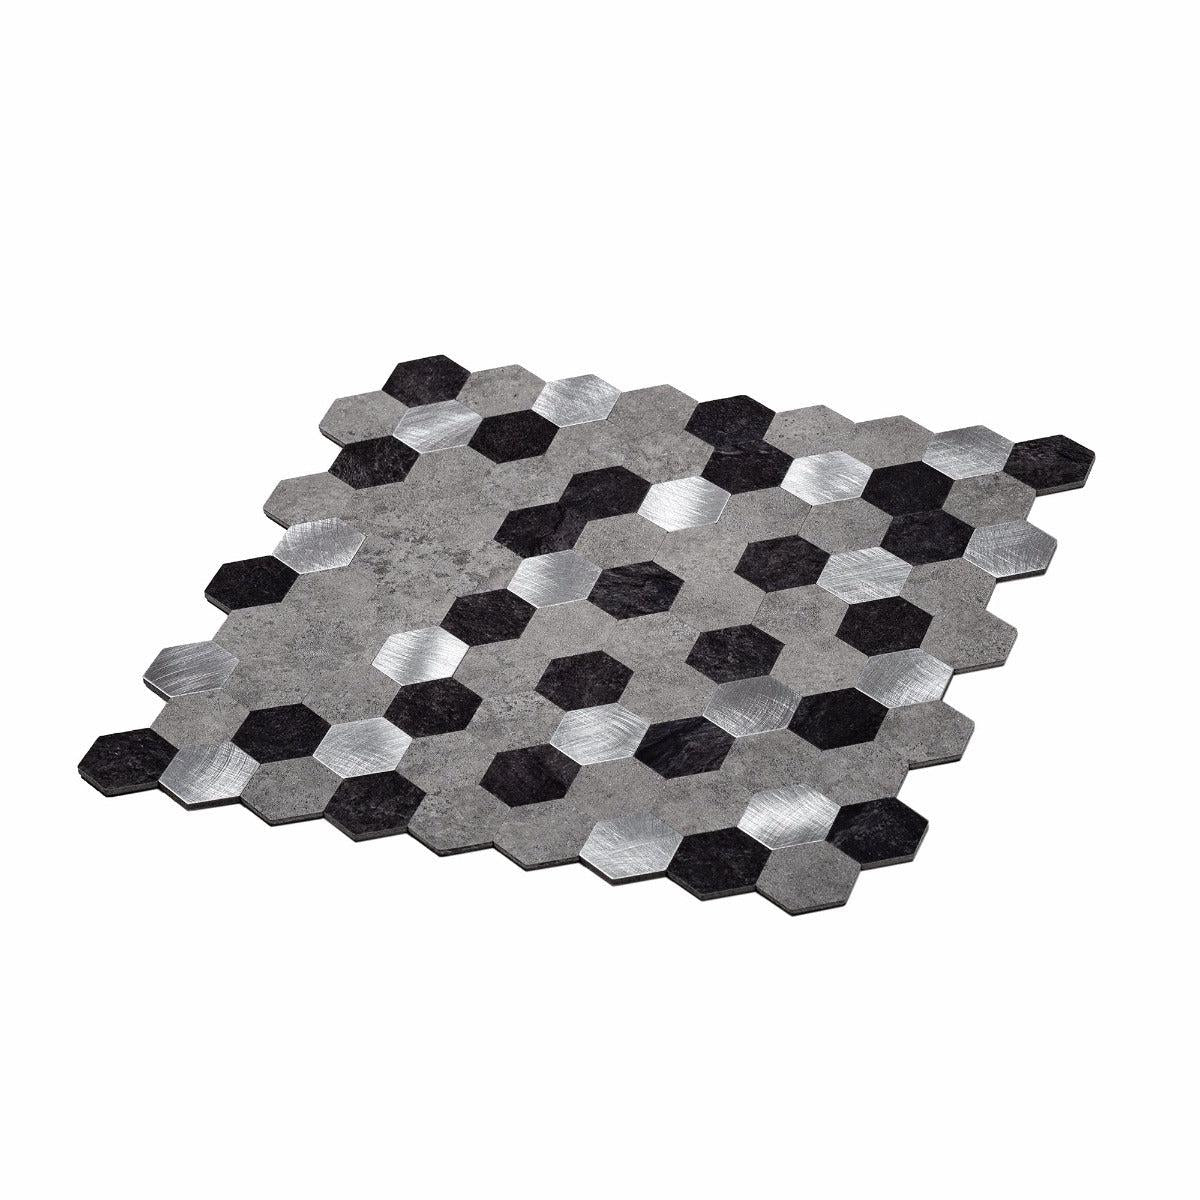 1.25" Silver, Grey and Black Hexagon Peel and Stick Tile Sample